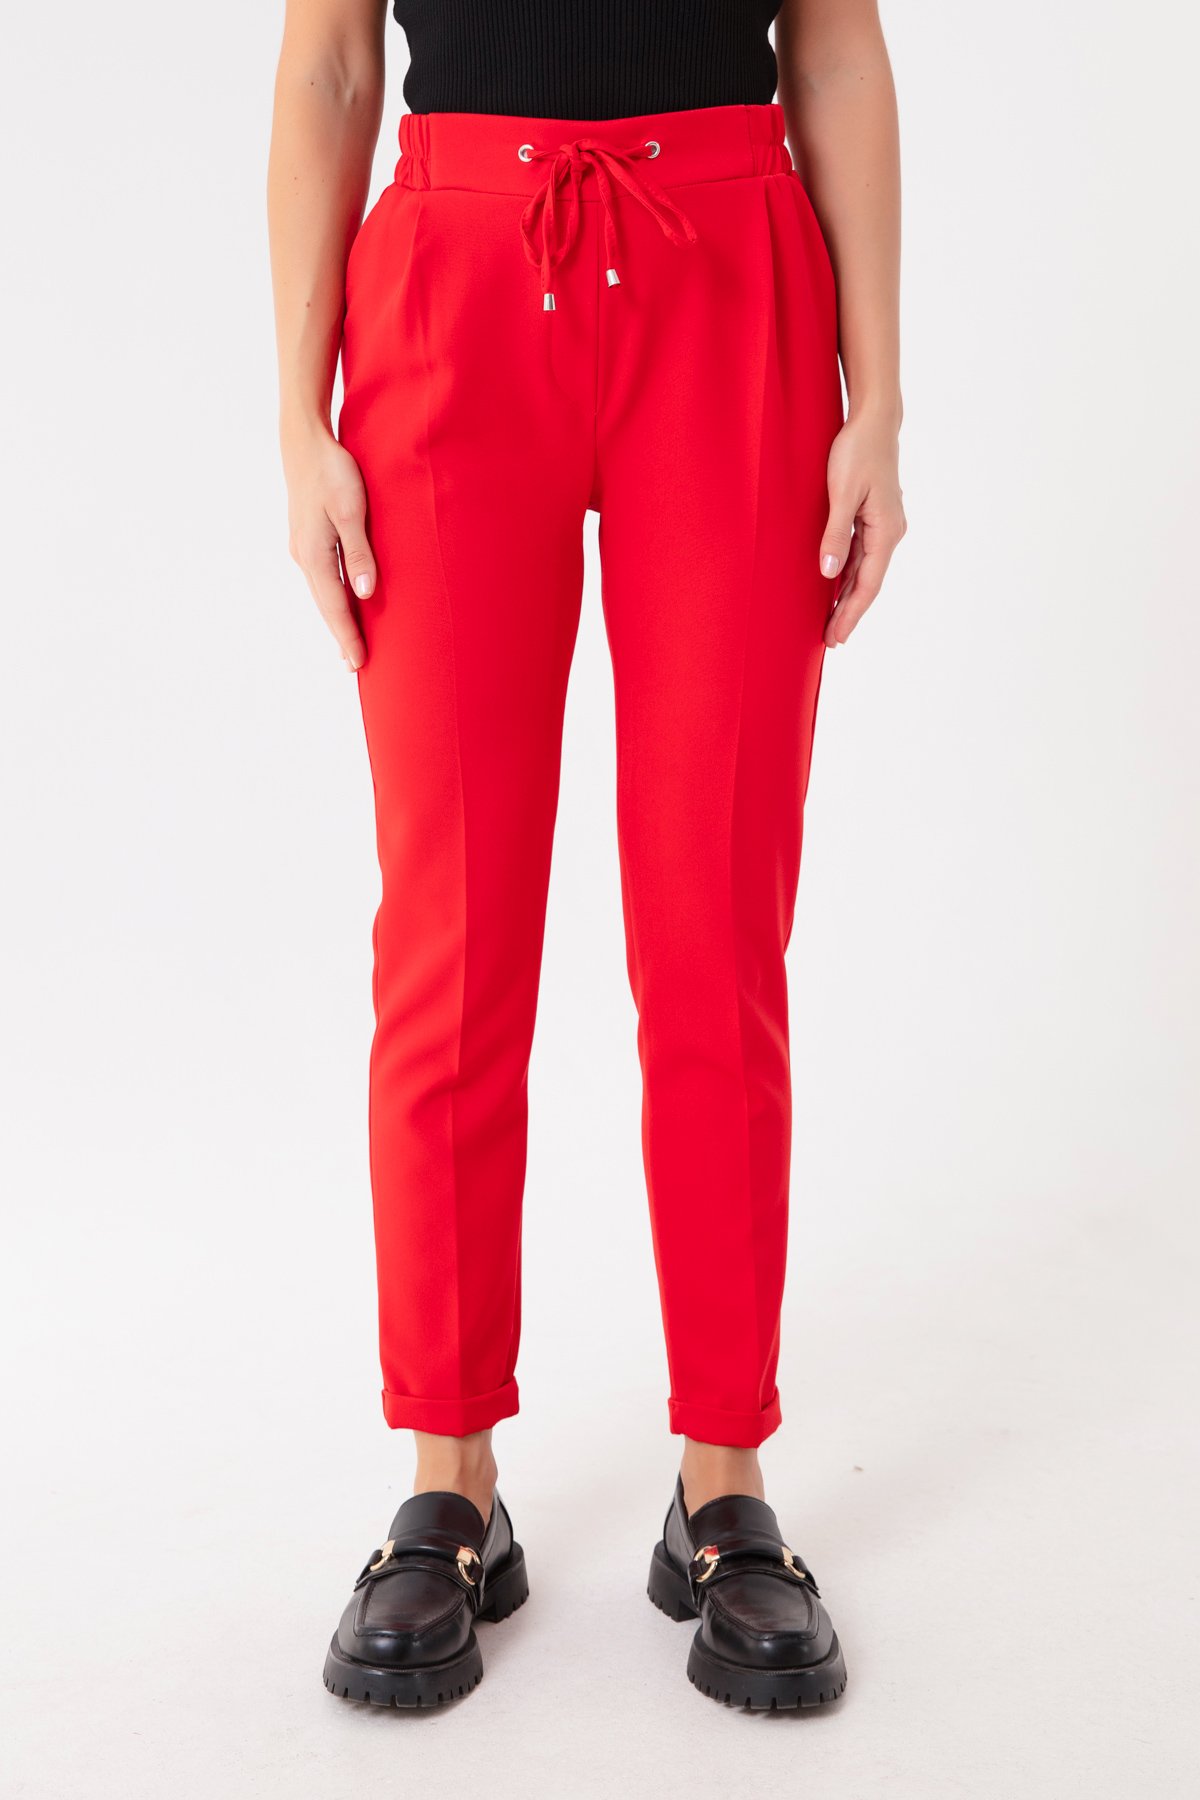 Women's Red Lace-Up Waist Trousers